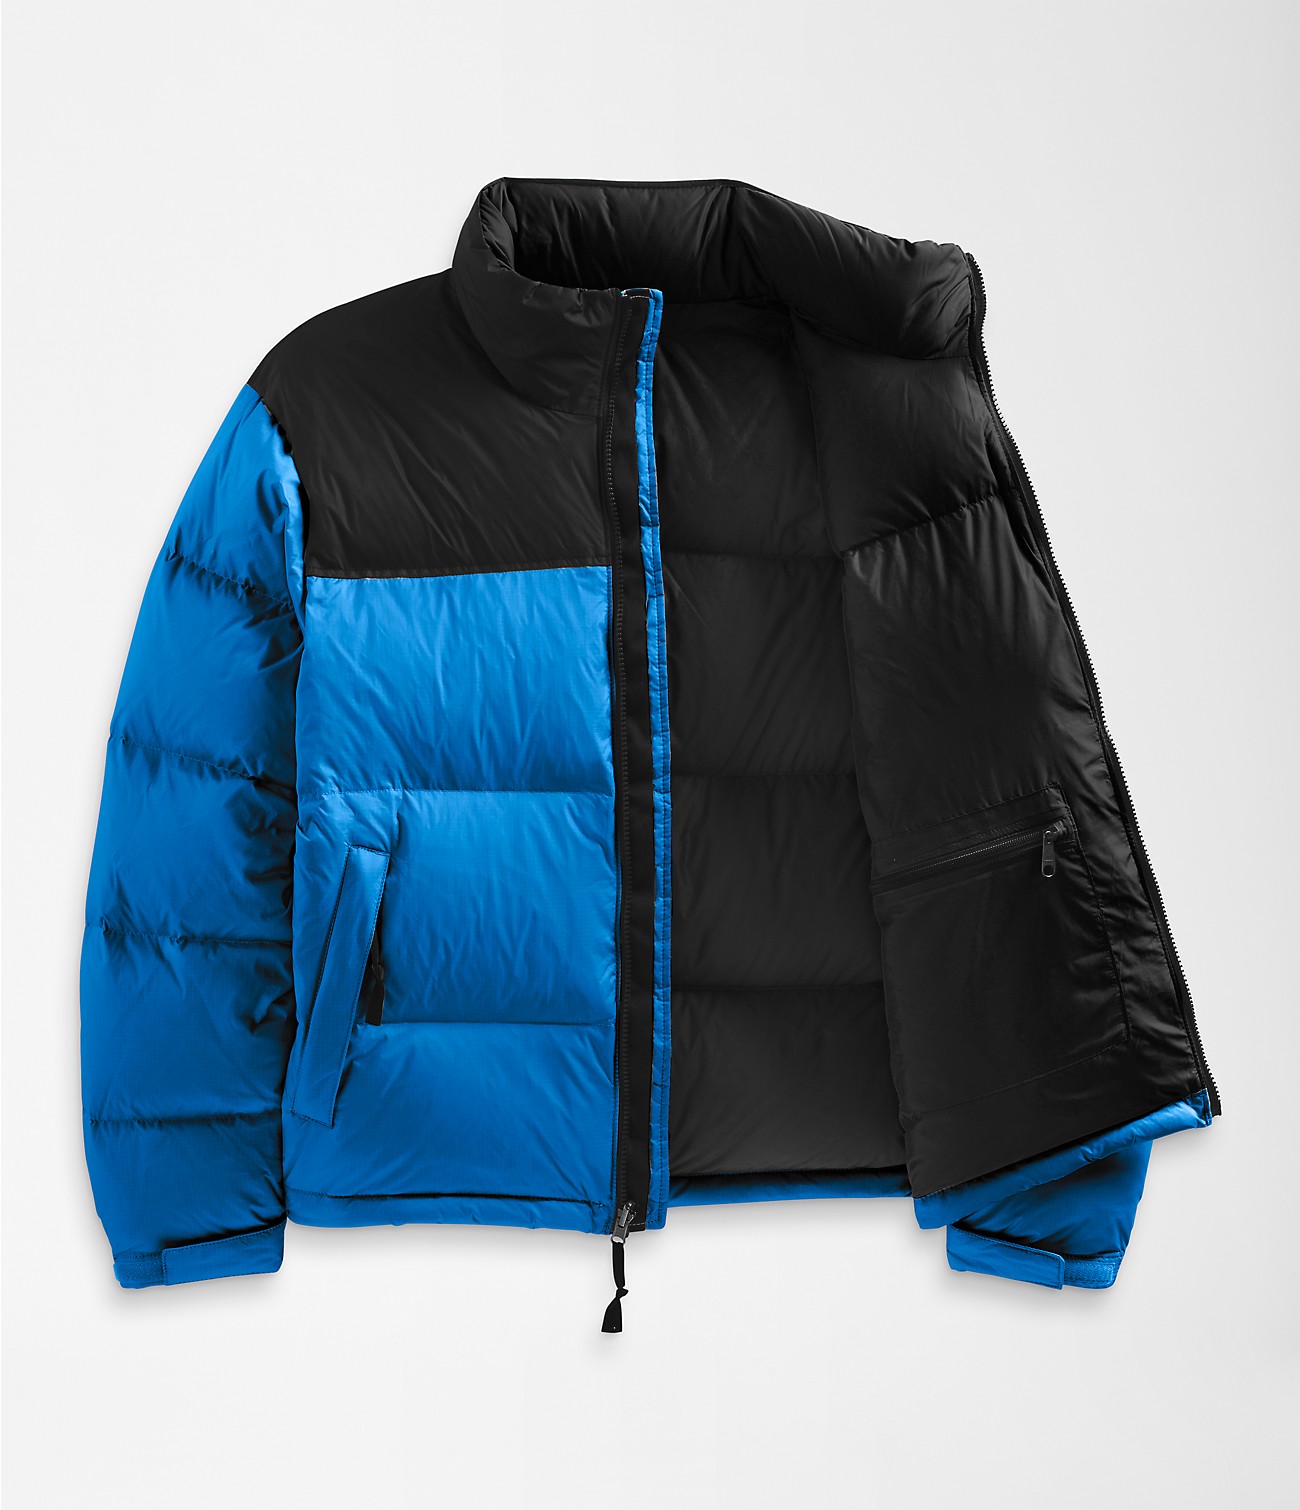 Unlock Wilderness' choice in the North Face Vs Mammut comparison, the 1996 Retro Nuptse Jacket by The North Face